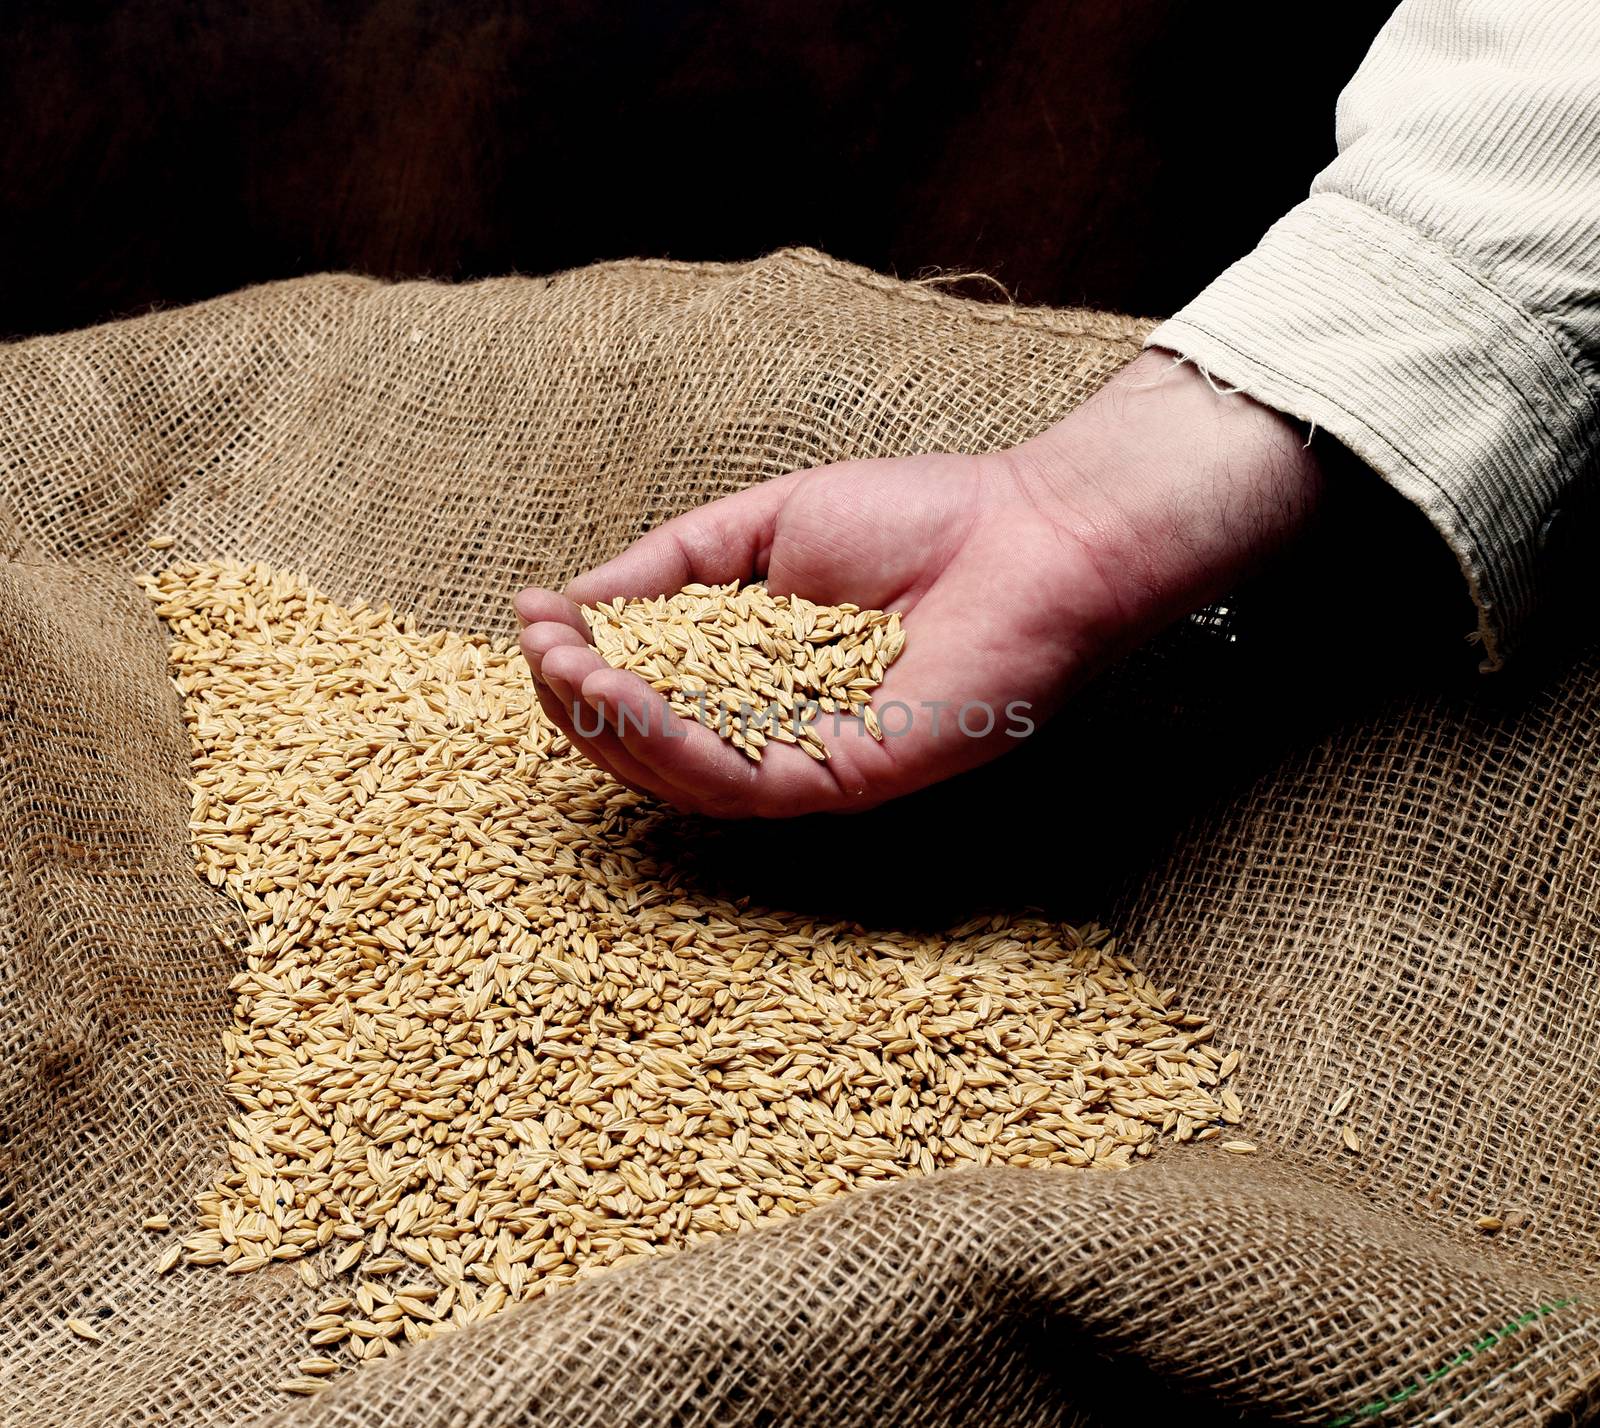  wheat sowing seed in man's hand